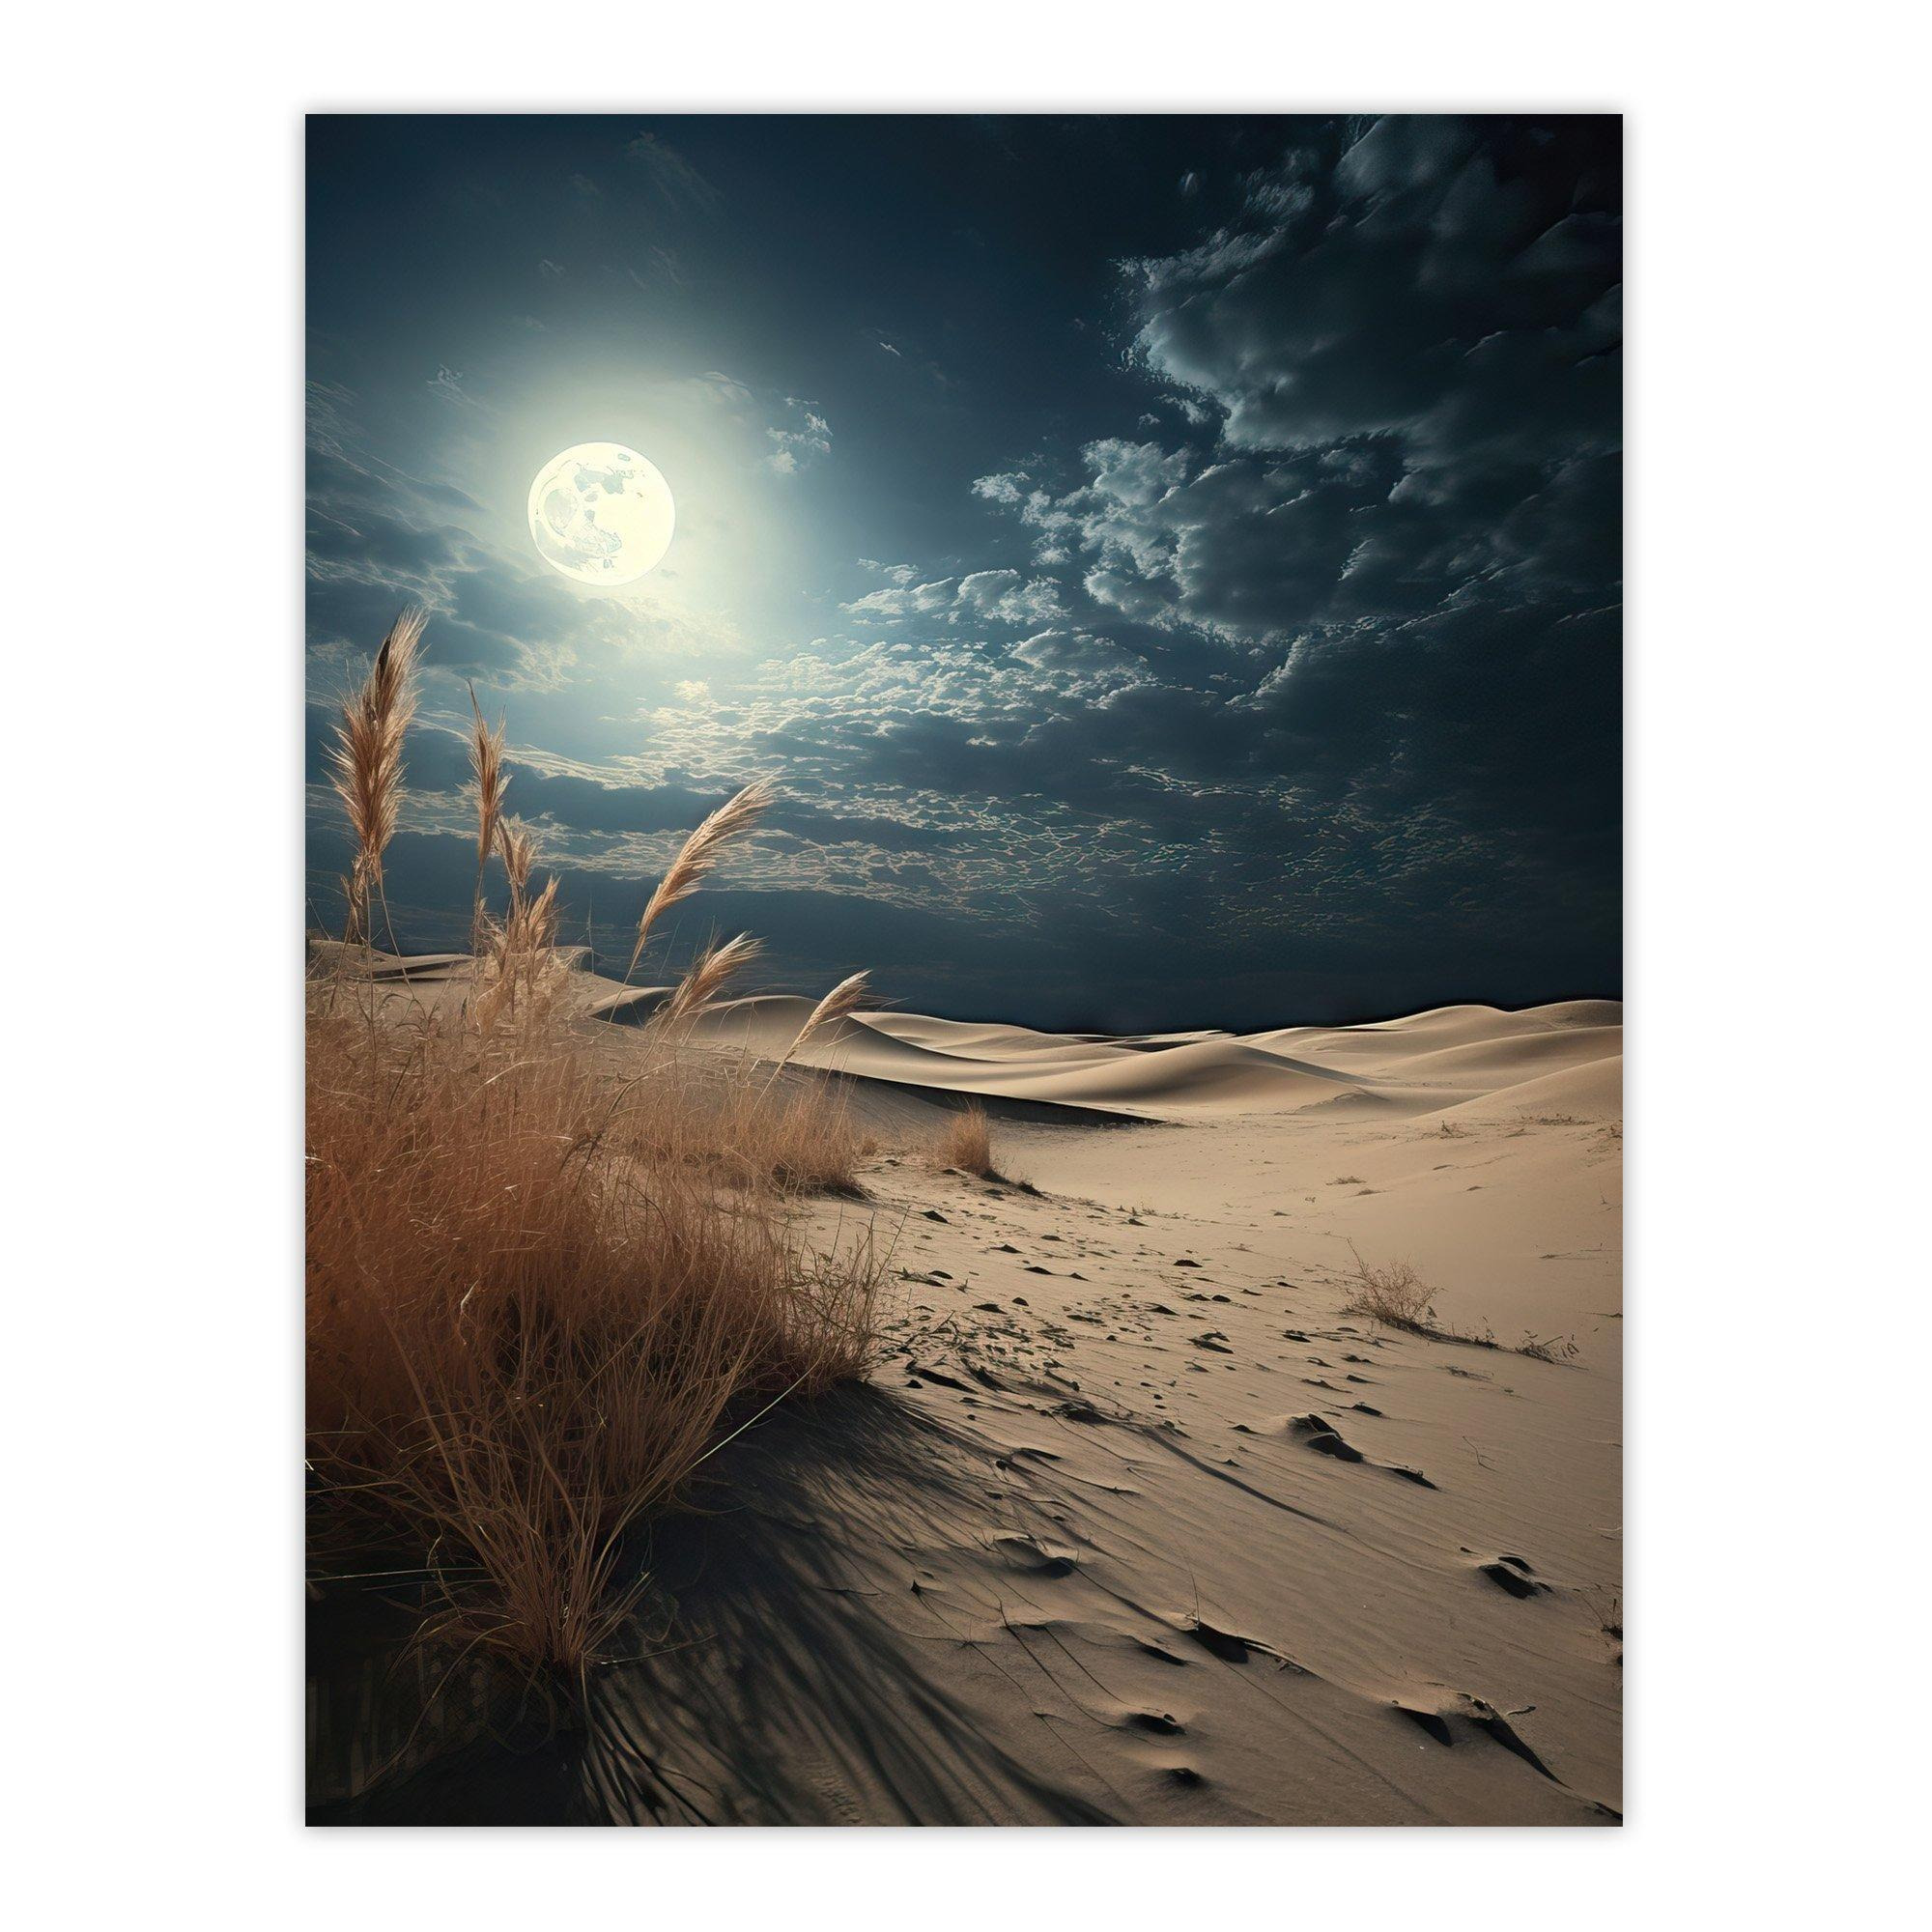 Windswept Seaside Sand Dunes Under A Full Moon Reeds In Moonlight Photograph Extra Large XL Unframed Wall Art Poster Print - image 1